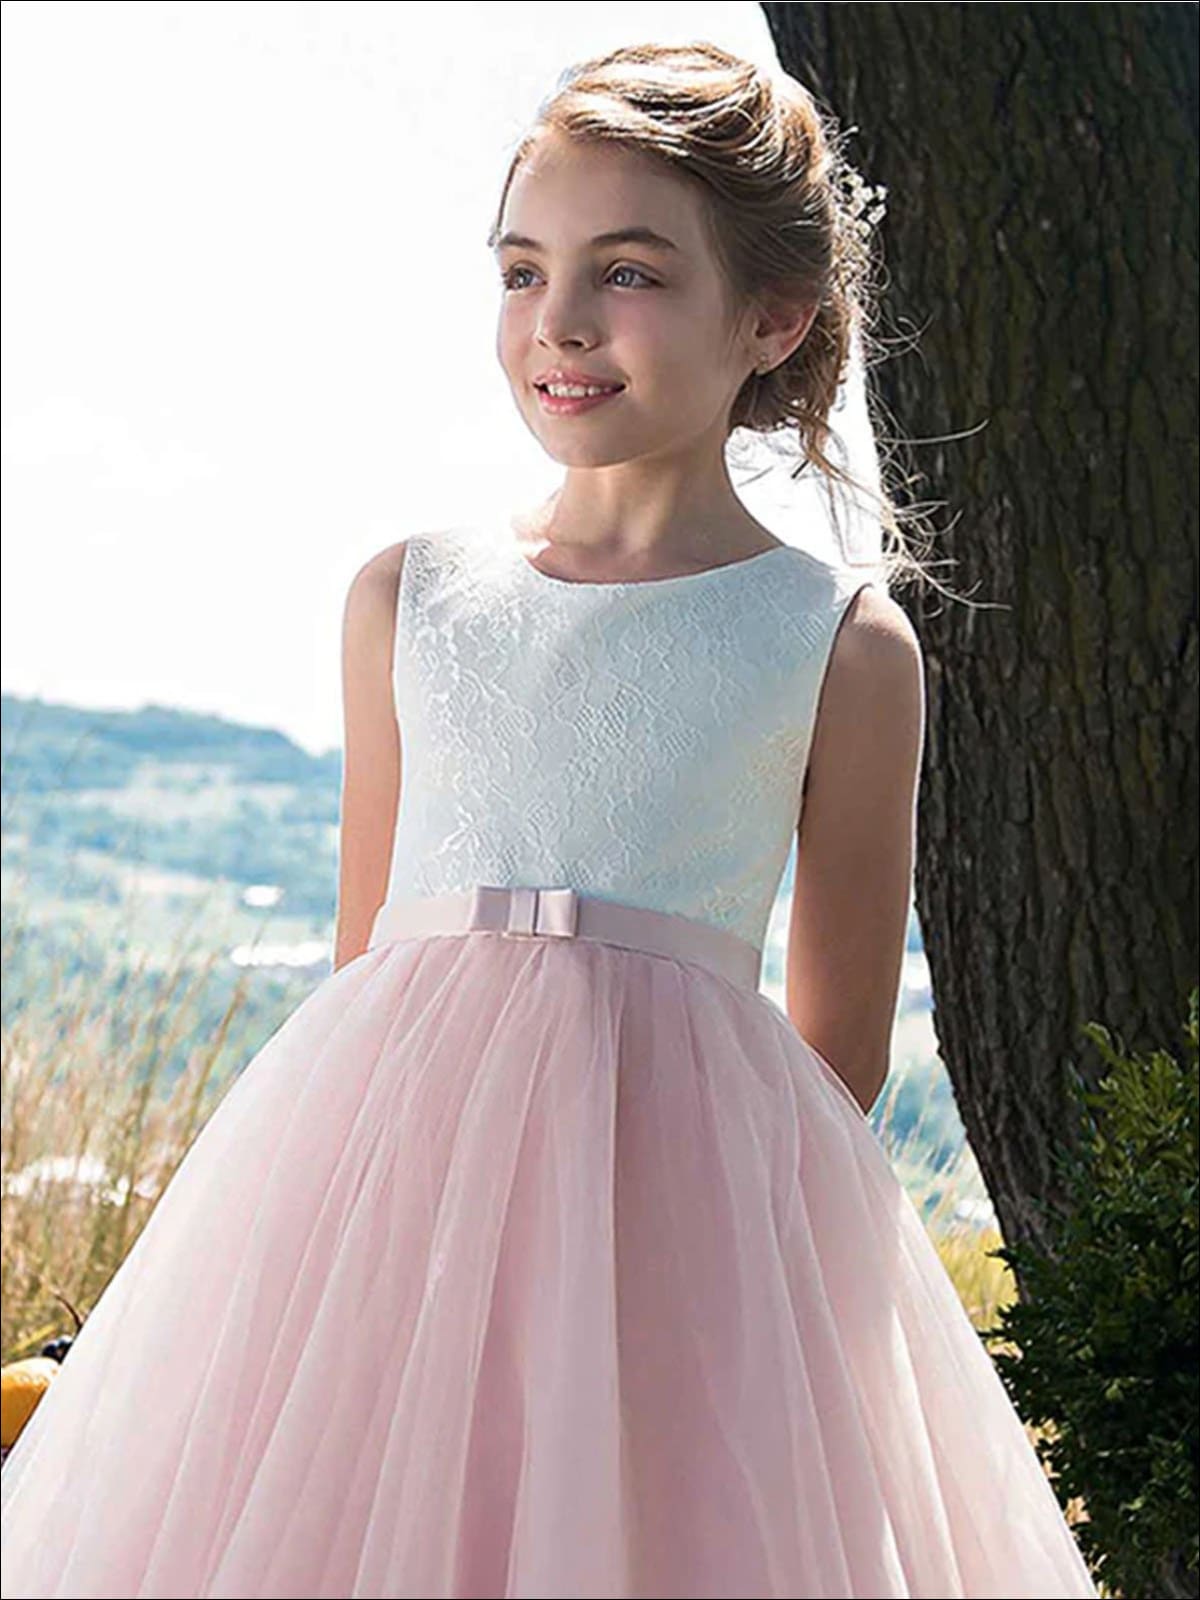 13 Best pink and white dress ideas  gowns dresses tulle skirt